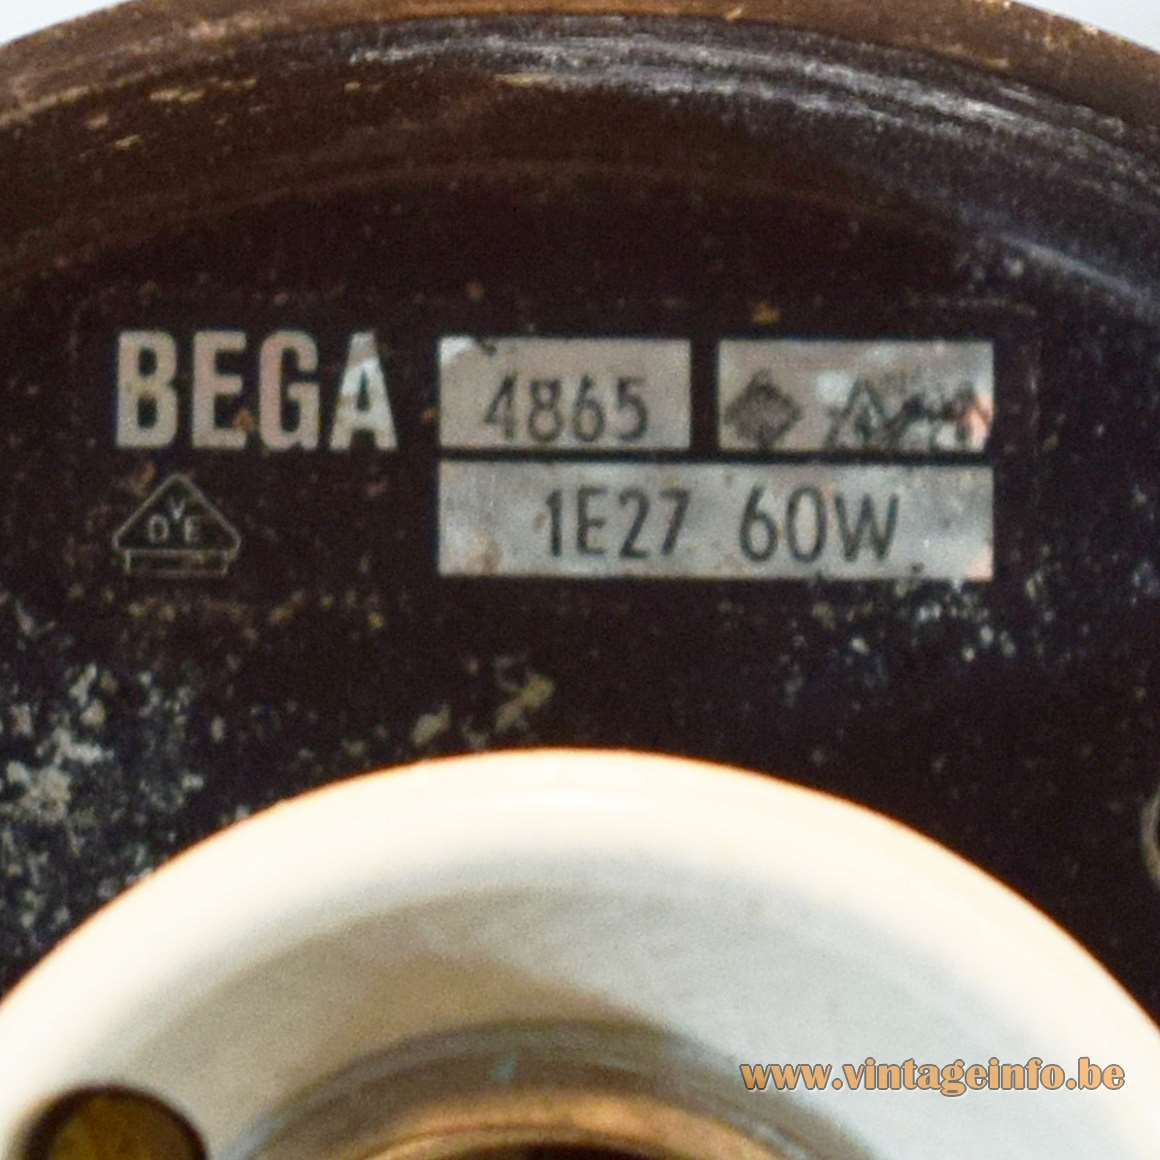 Bega Outdoor Flush Mounts or Wall Lamps 4865 - Label